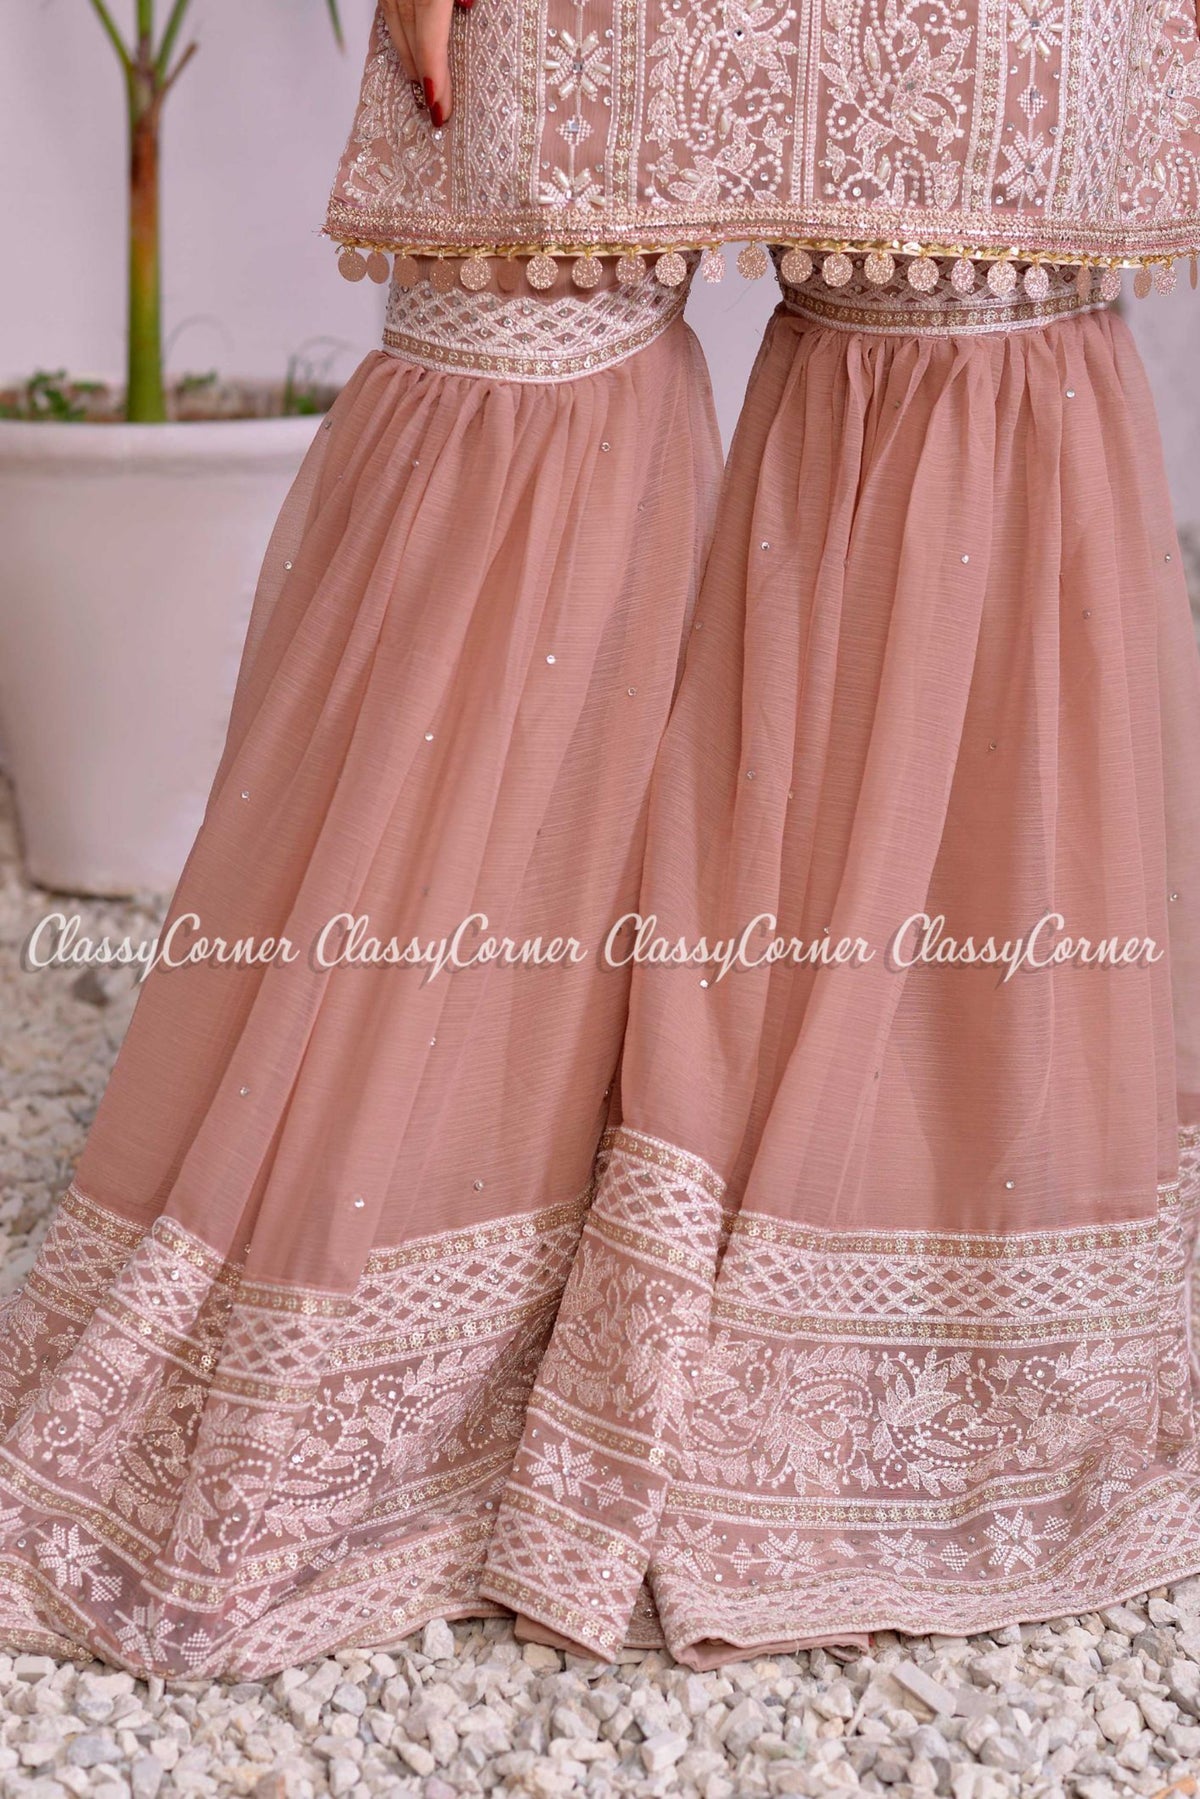 Pink Silver Chiffon Embroidered Wedding Wear Gharara Outfit